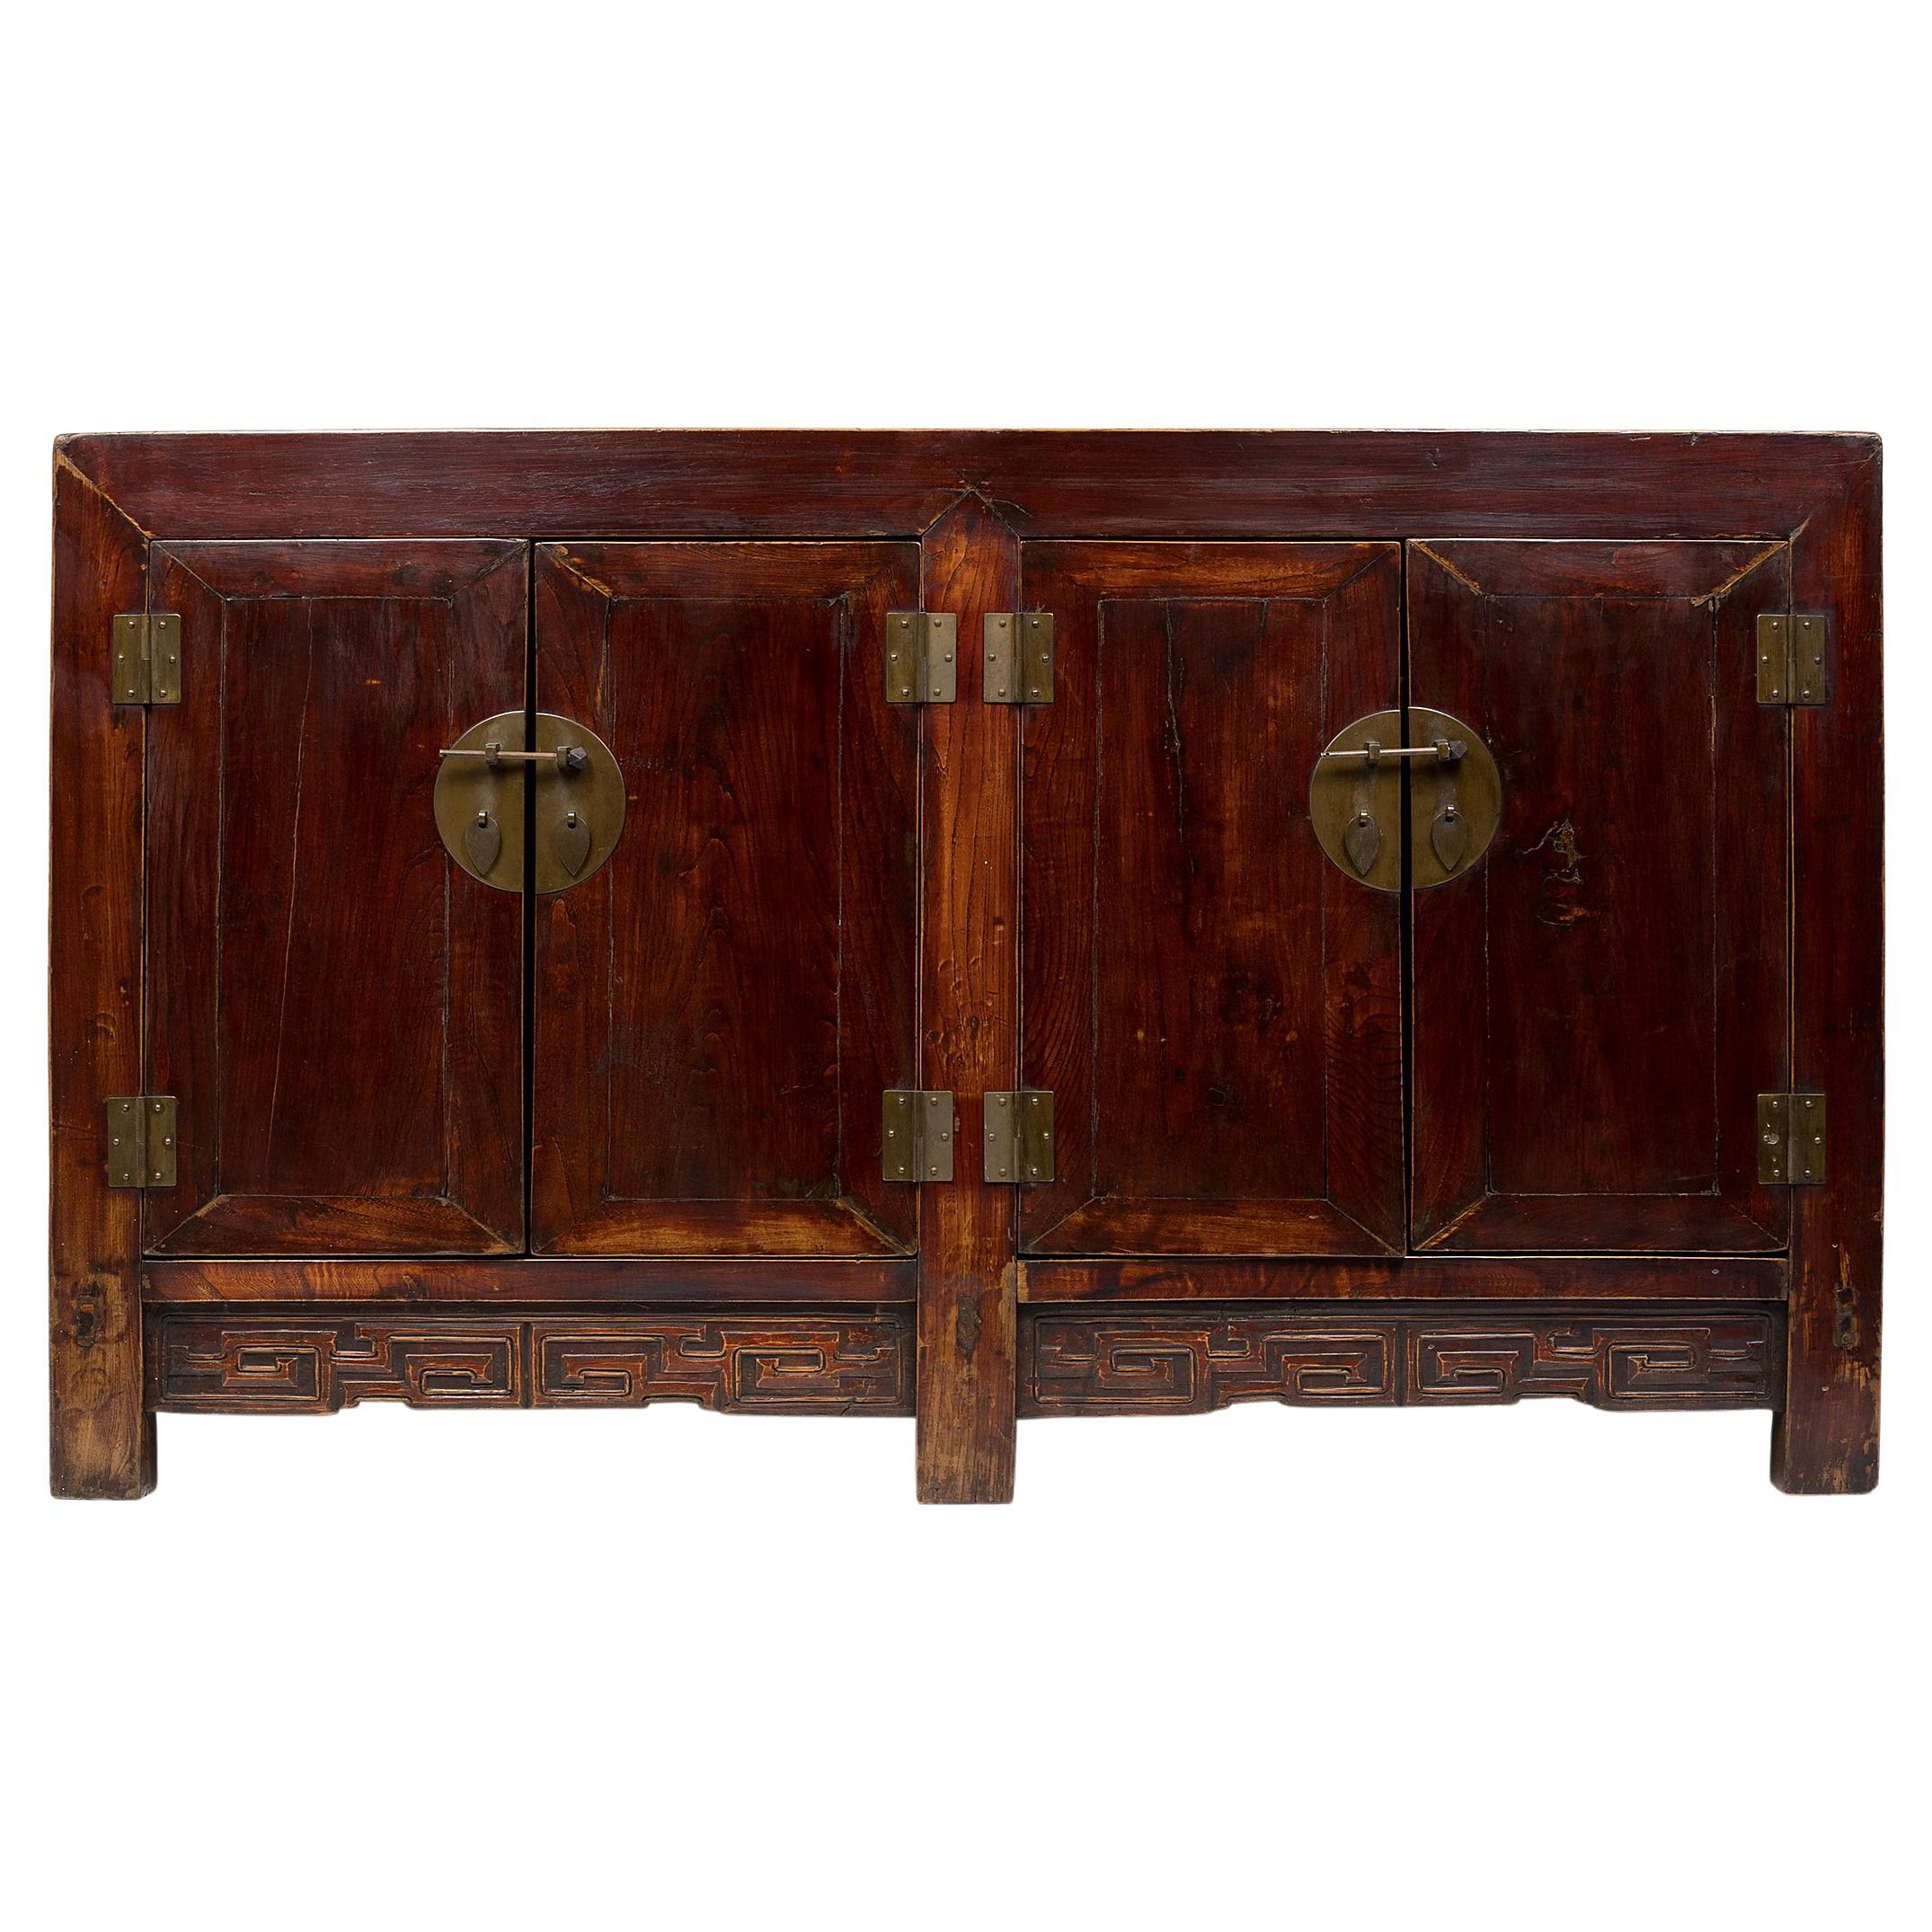 Lacquered Chinese Four Door Coffer, circa 1850